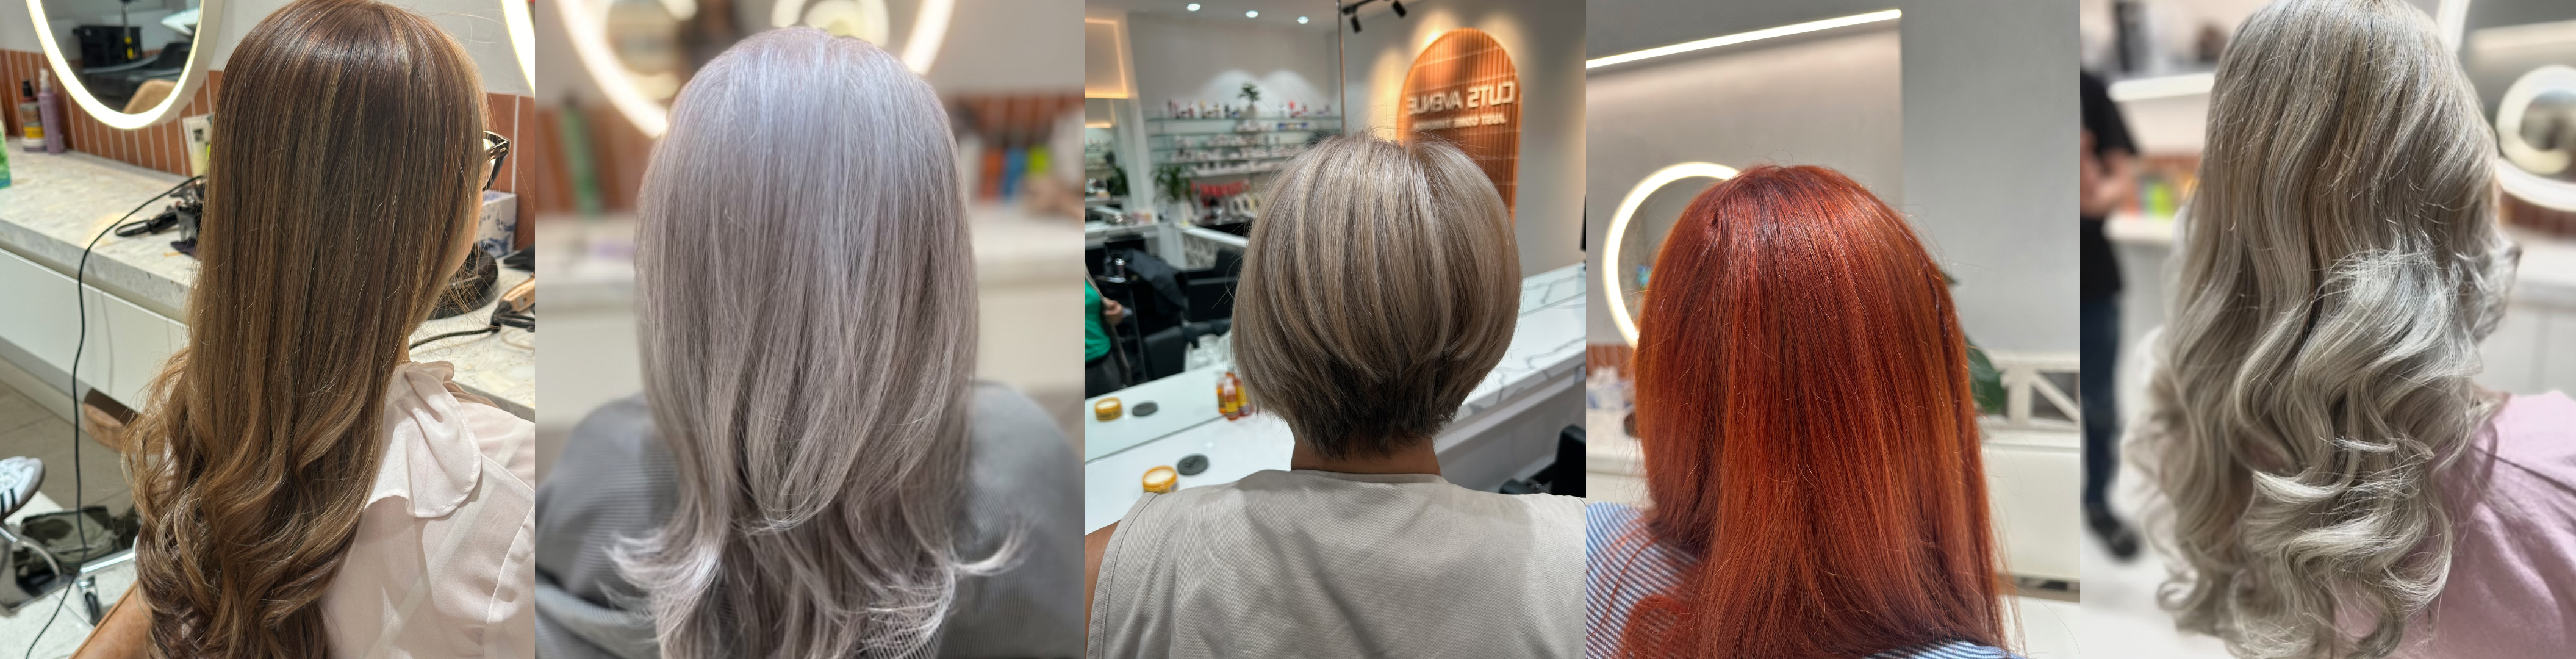 Montage of coloured and styled hair from Cuts Avenue Salon in Chatswood